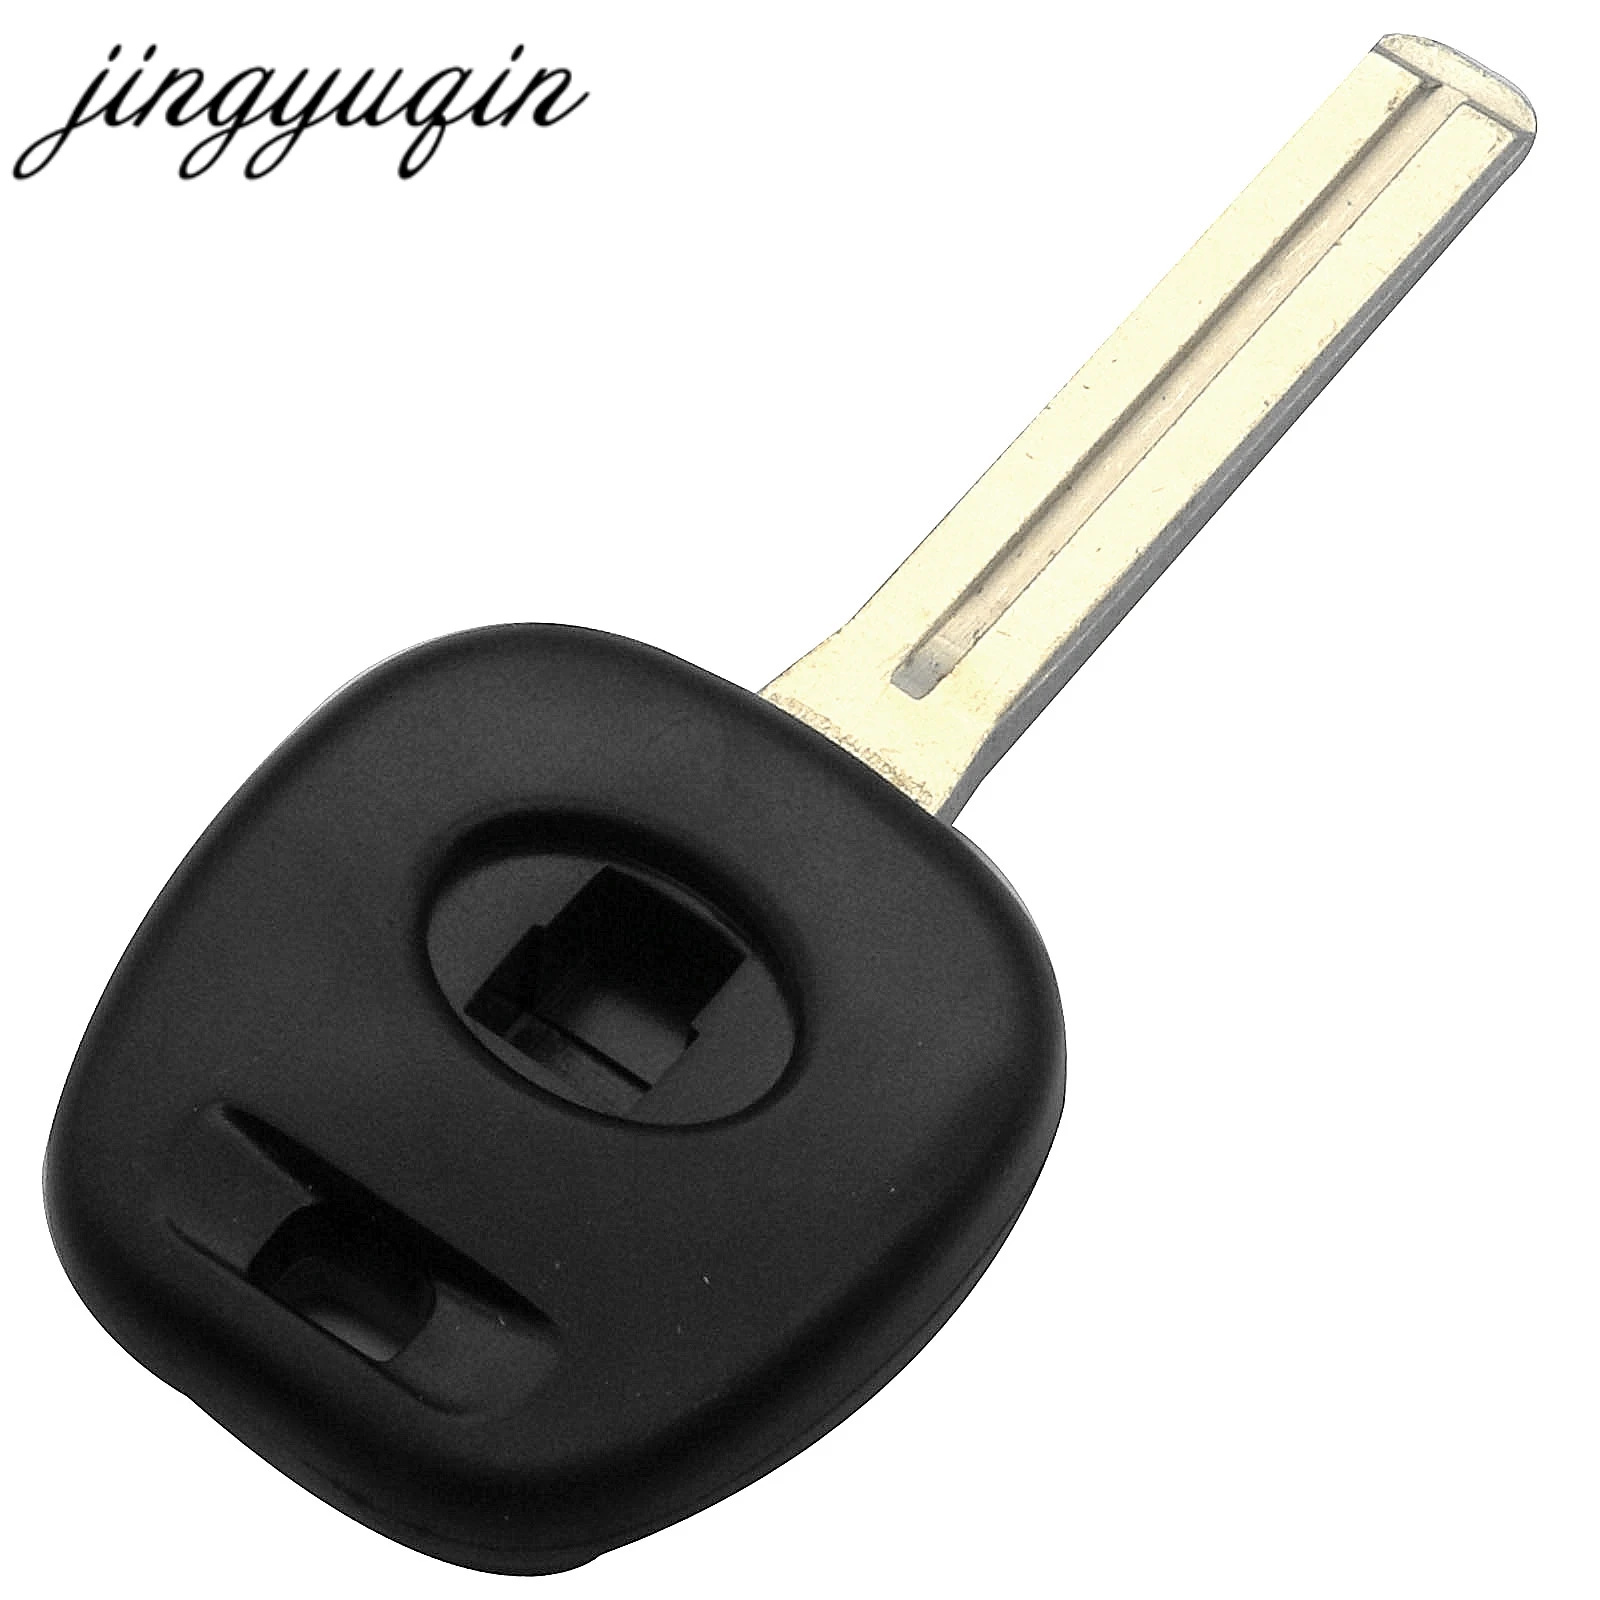 

jingyuqin TOY43/TOY48 Uncut Key Blade Car Transponder Key Shell For Toyota No Chip Fob Case Replacement